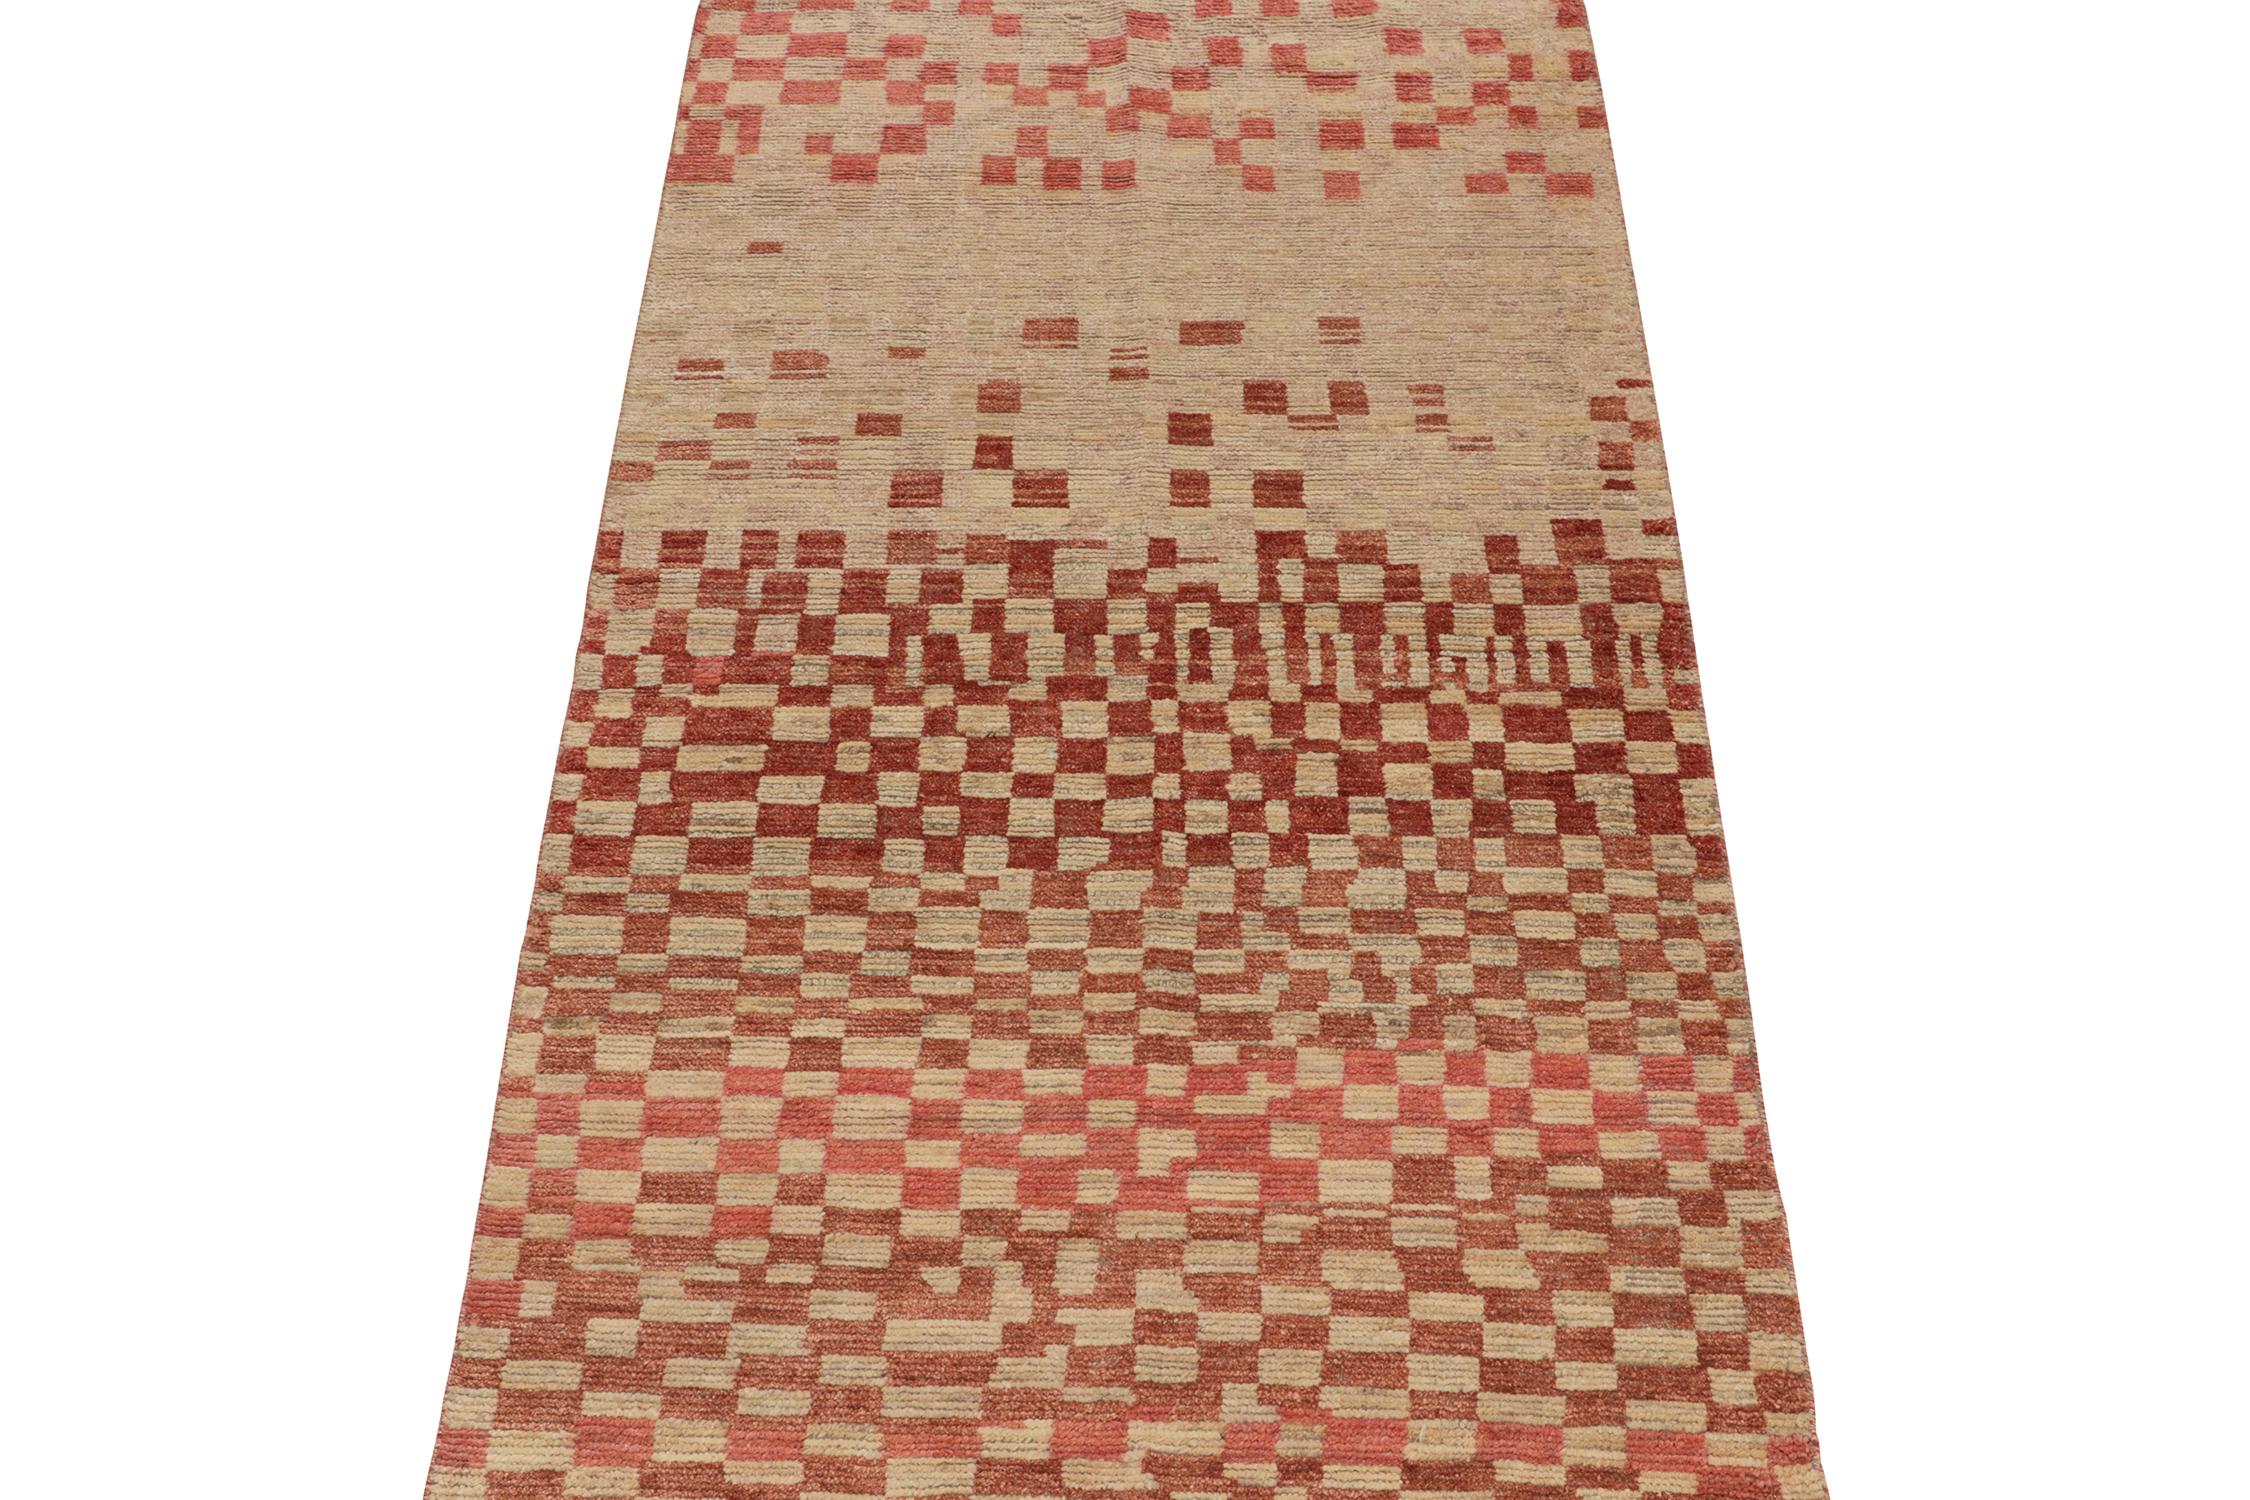 Tribal Rug & Kilim’s Moroccan Style Rug in Beige-Brown and Red Geometric Pattern For Sale